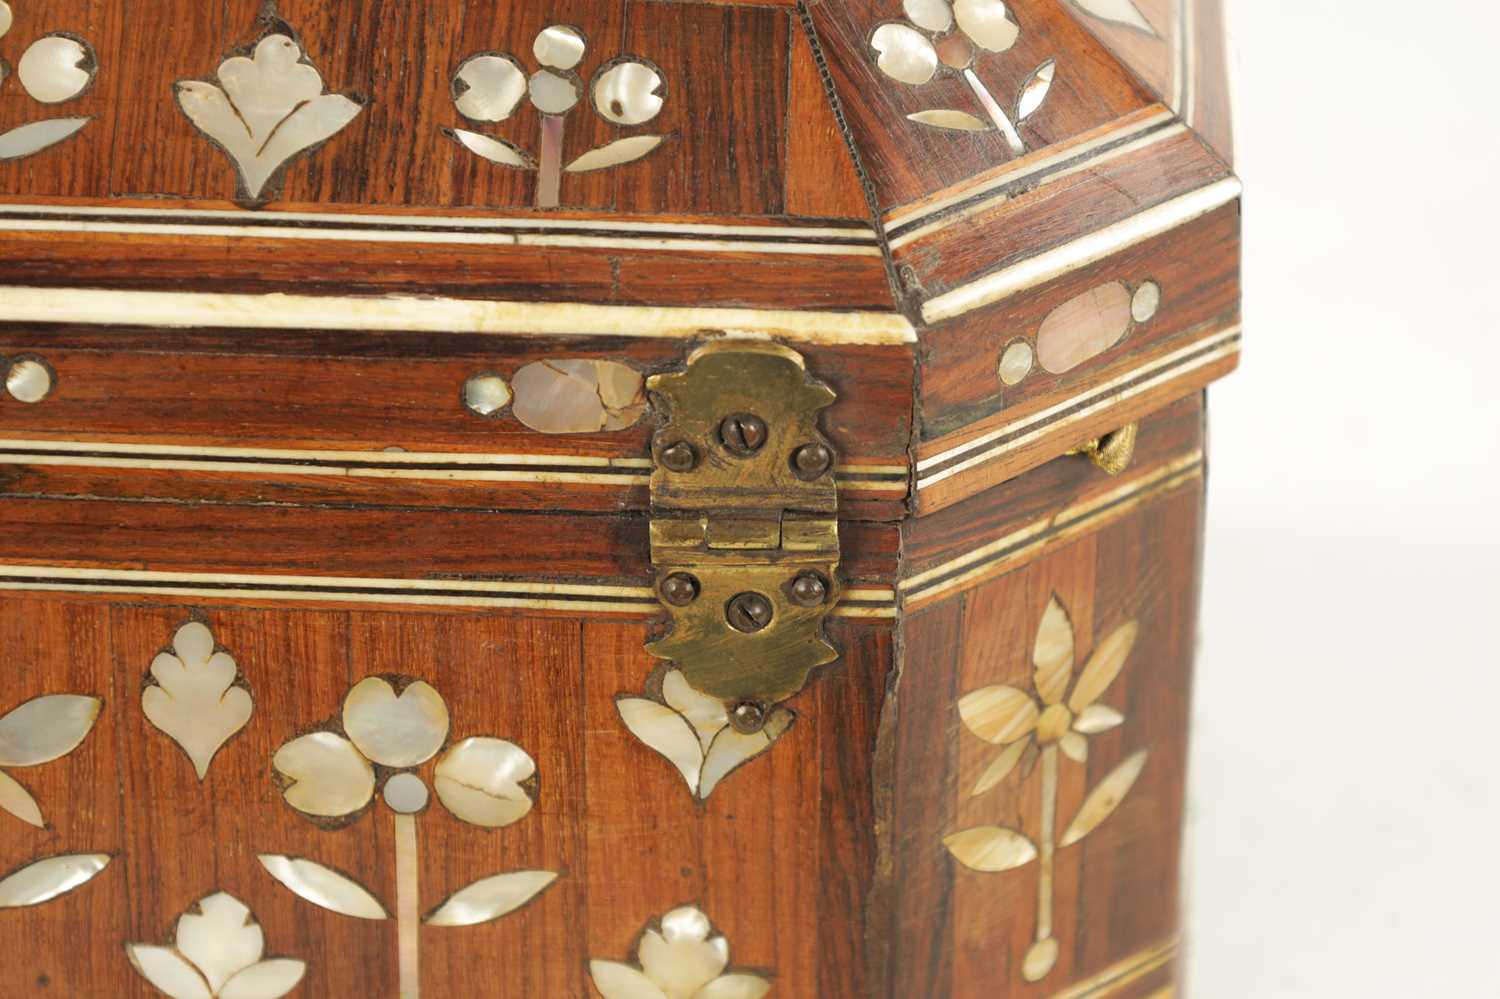 AN EARLY 18TH CENTURY SOUTH AMERICAN MOTHER OF PEARL INLAID BOX - Image 9 of 9